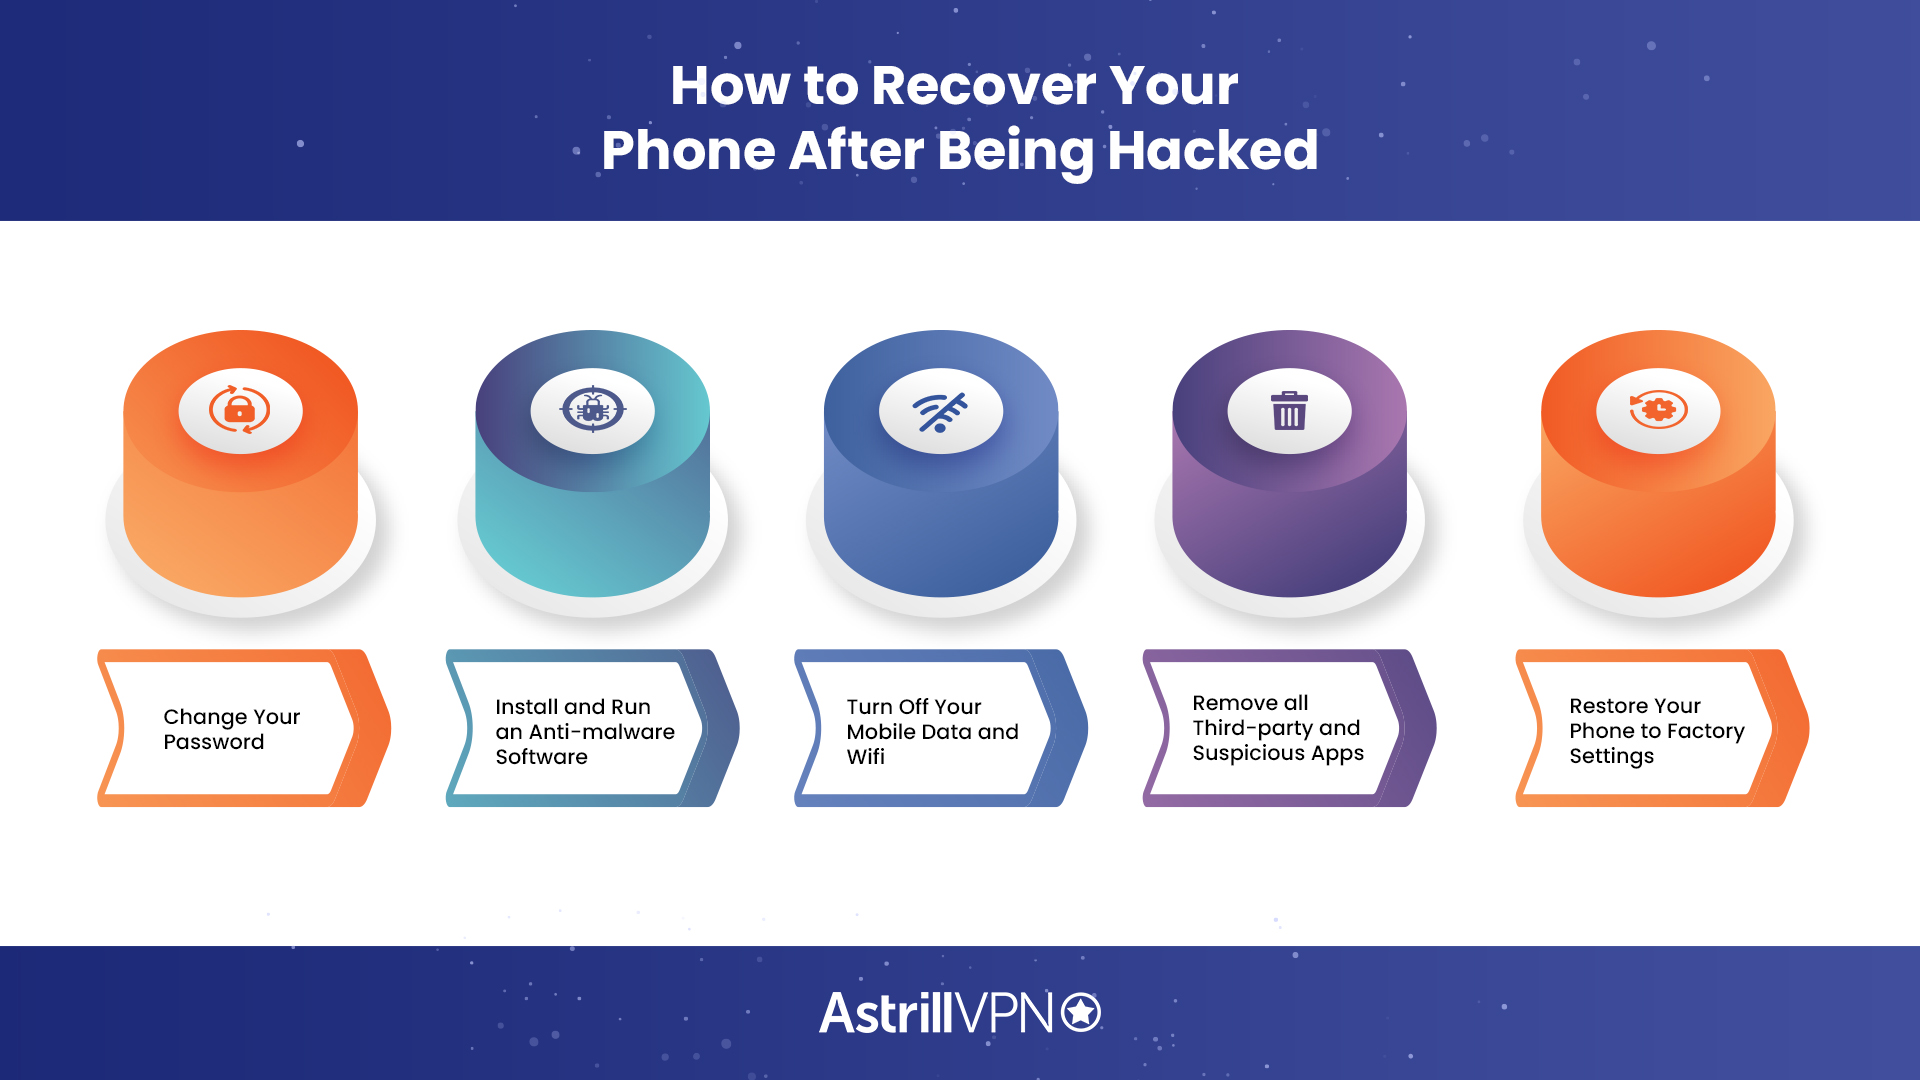 How to recover your phone after being hacked